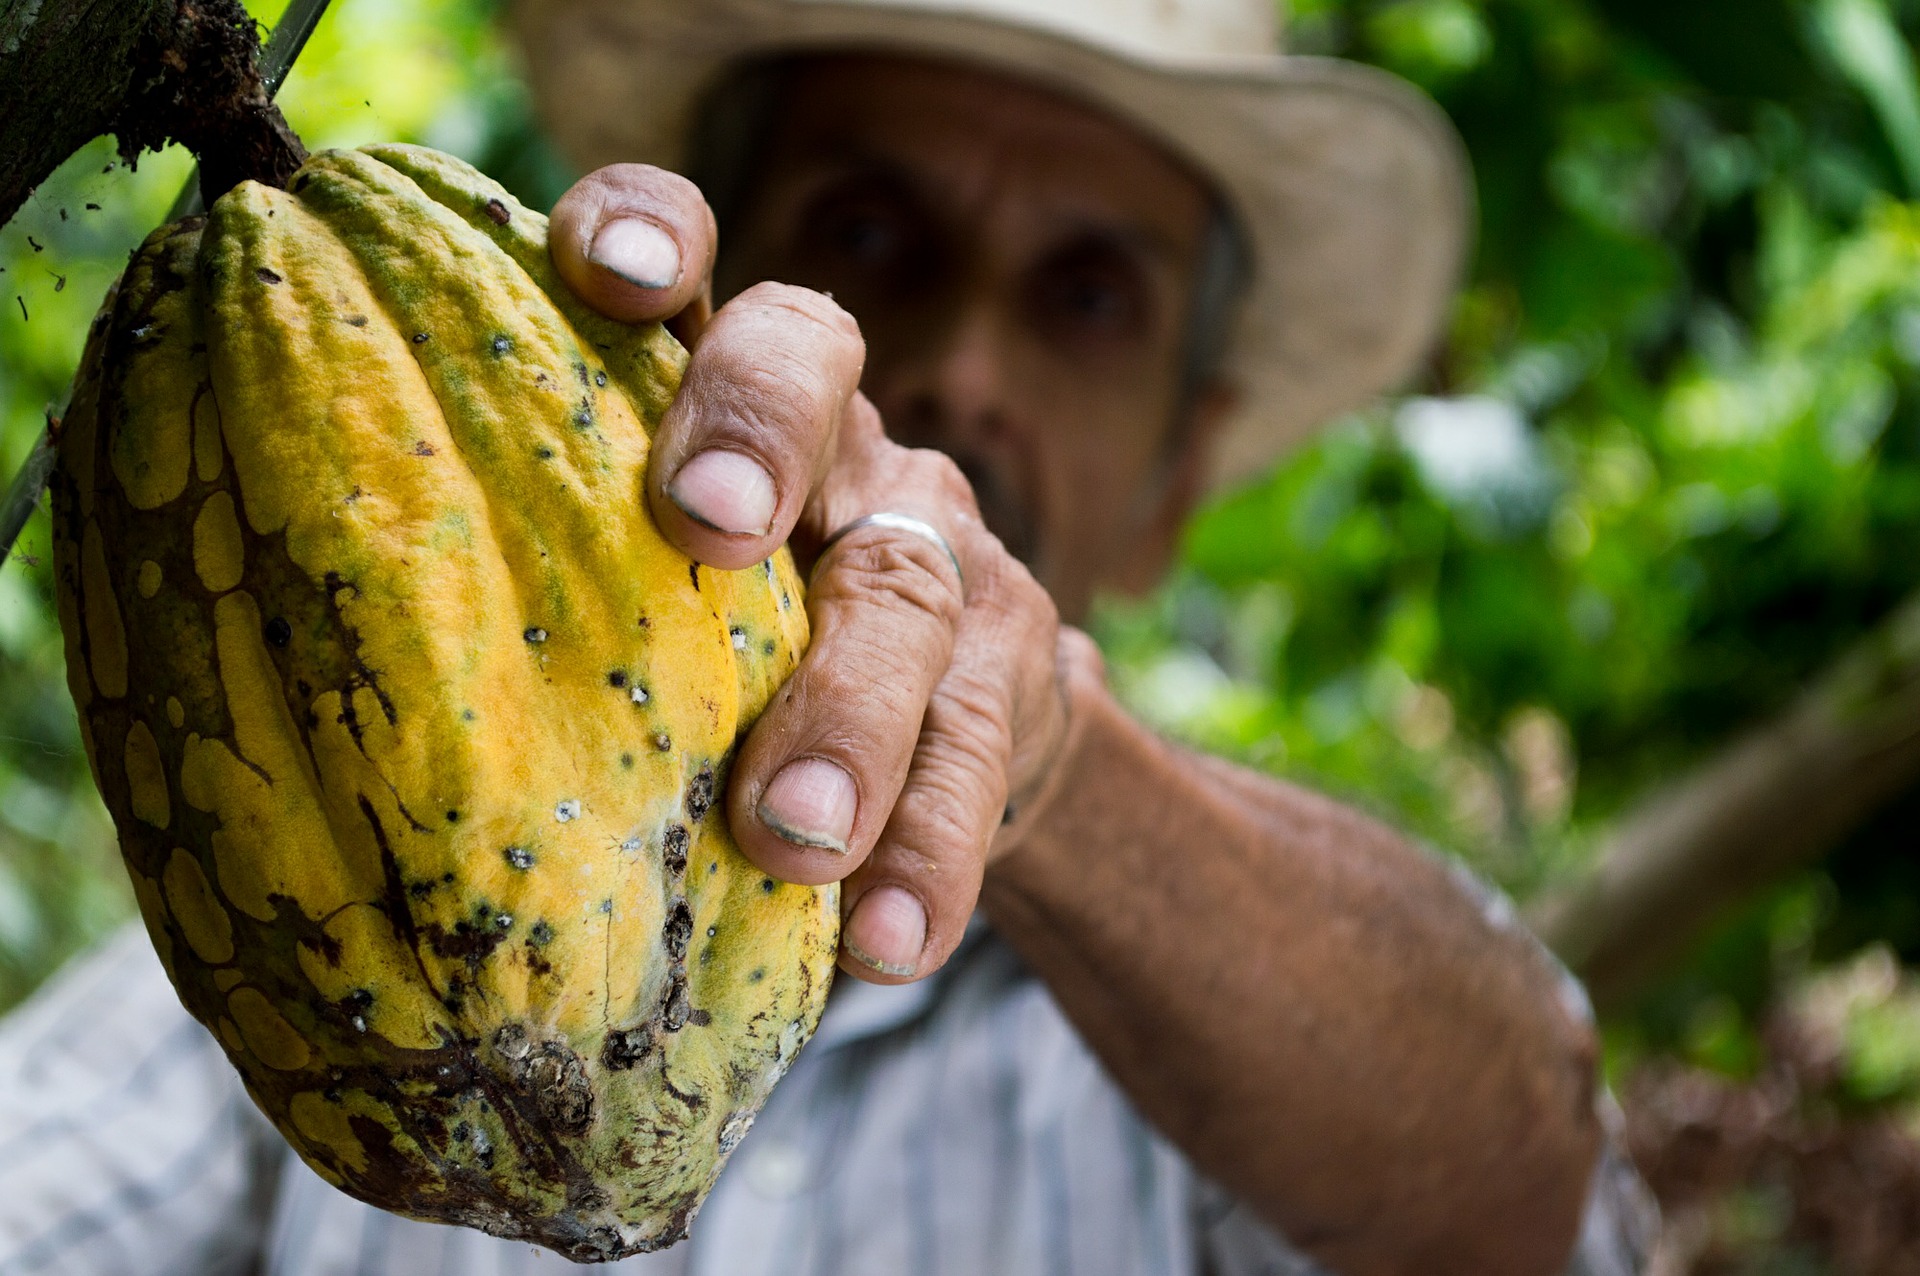 Olam Food Ingredients reaches Cocoa Compass targets